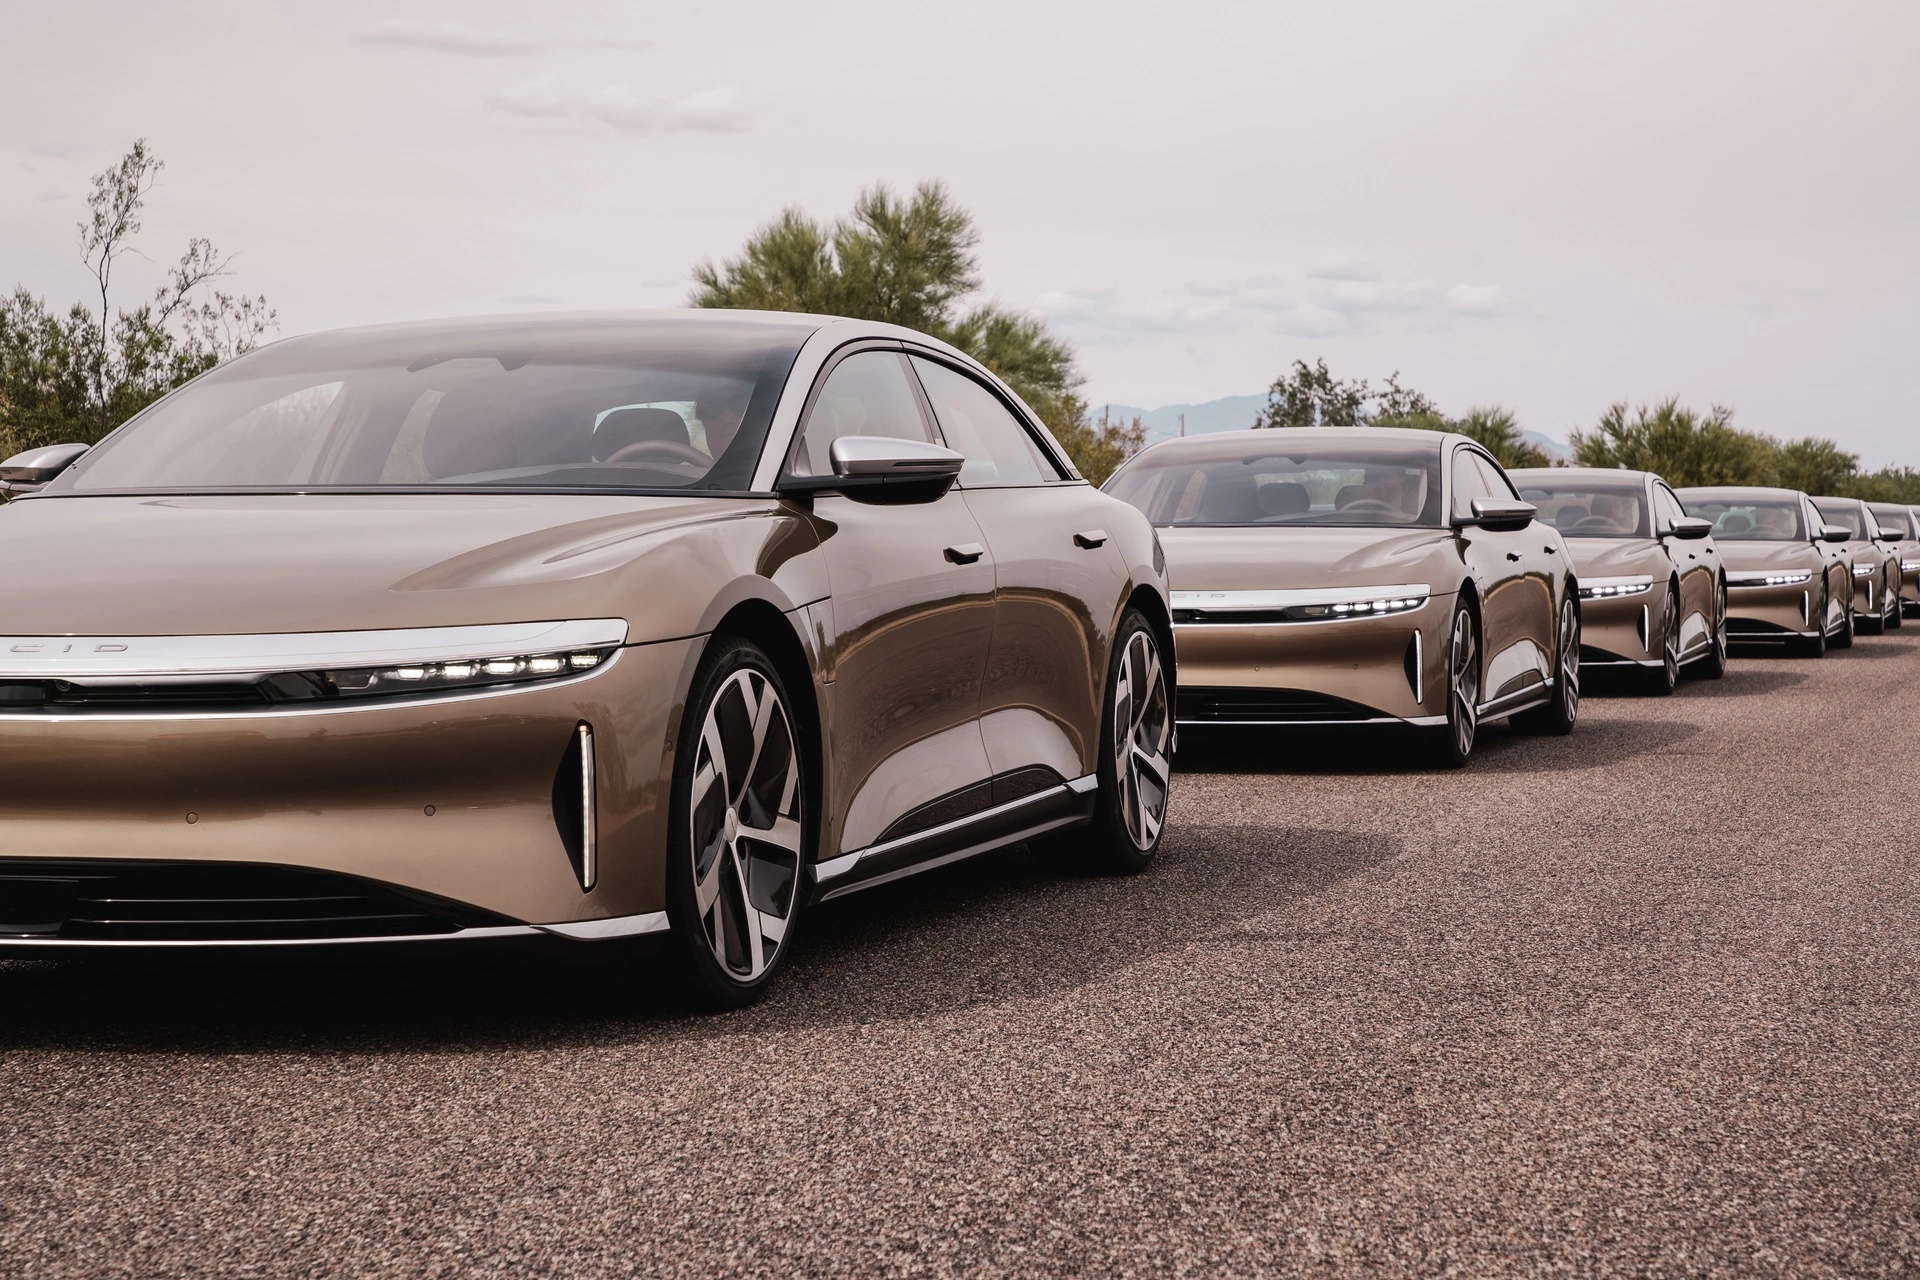 Government of Saudi Arabia To Buy Up To 100,000 Lucid Air Vehicles